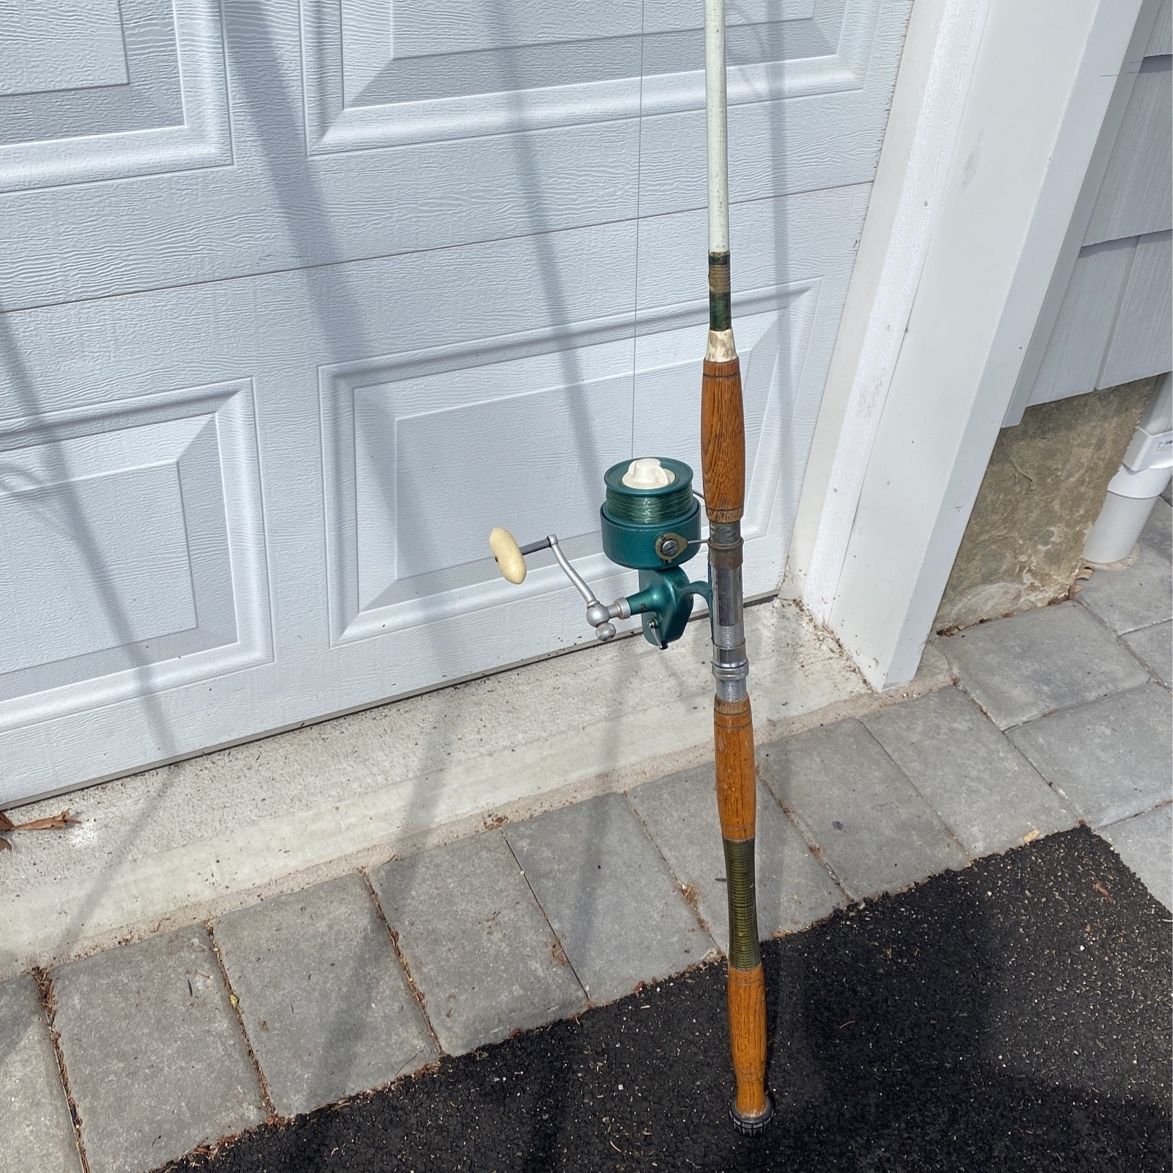 Fishing Pole For Adult Shakespeare Pole Penn Reel With Fishing Line On Reel  50.00 Firm for Sale in Phoenix, AZ - OfferUp